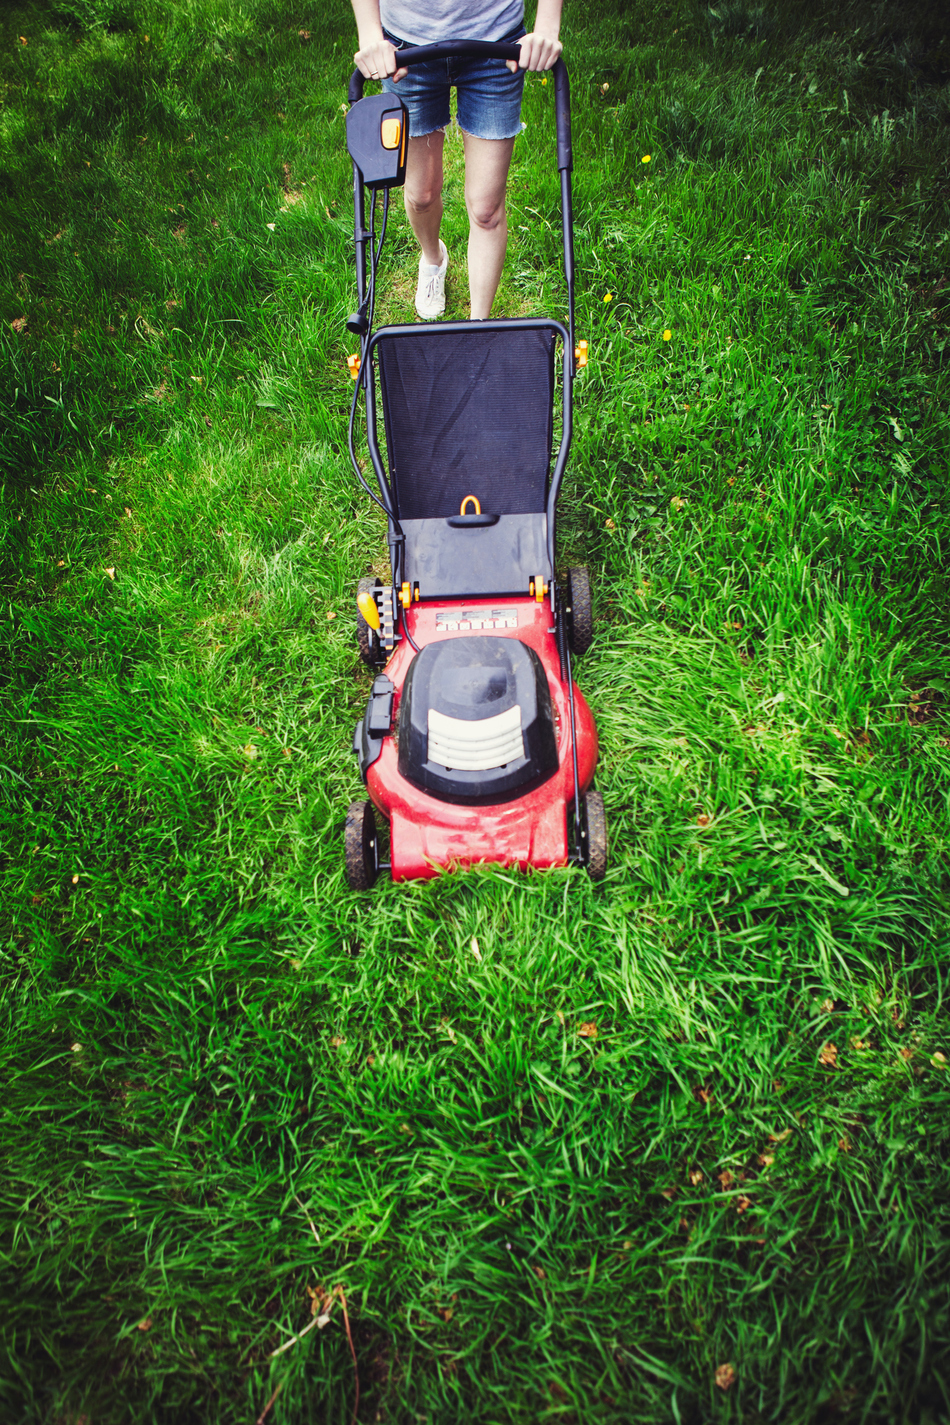 Safety Tips for Lawn Mowing